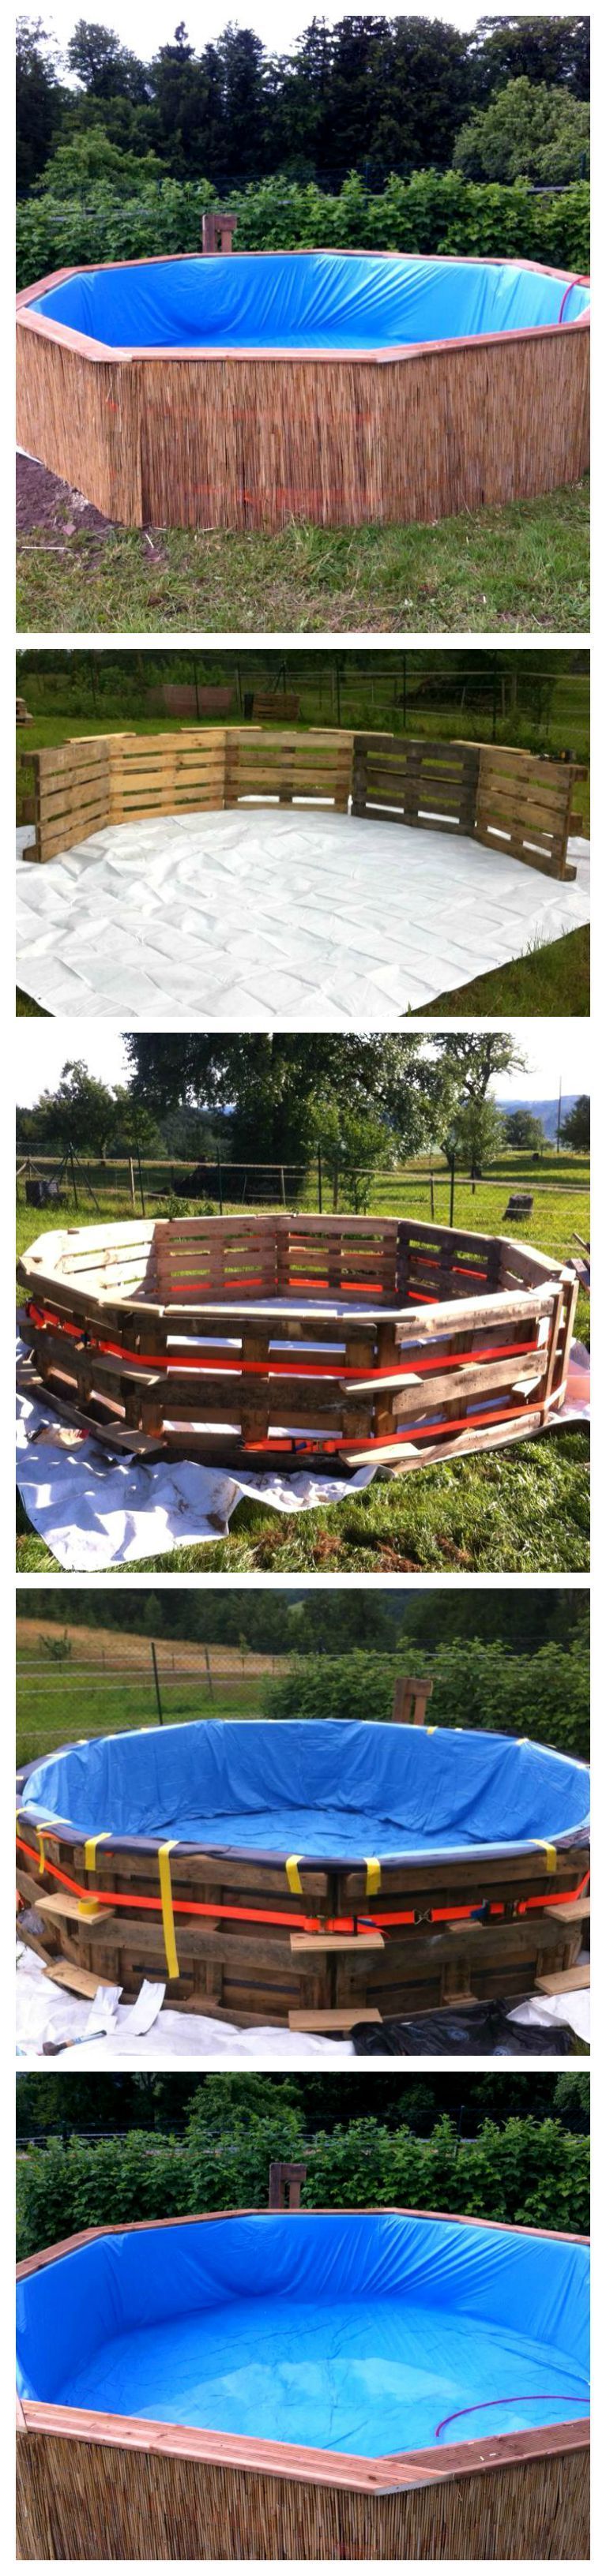 DIY Swimming Pool using 9 full size pallets and a very large medium duty tarp